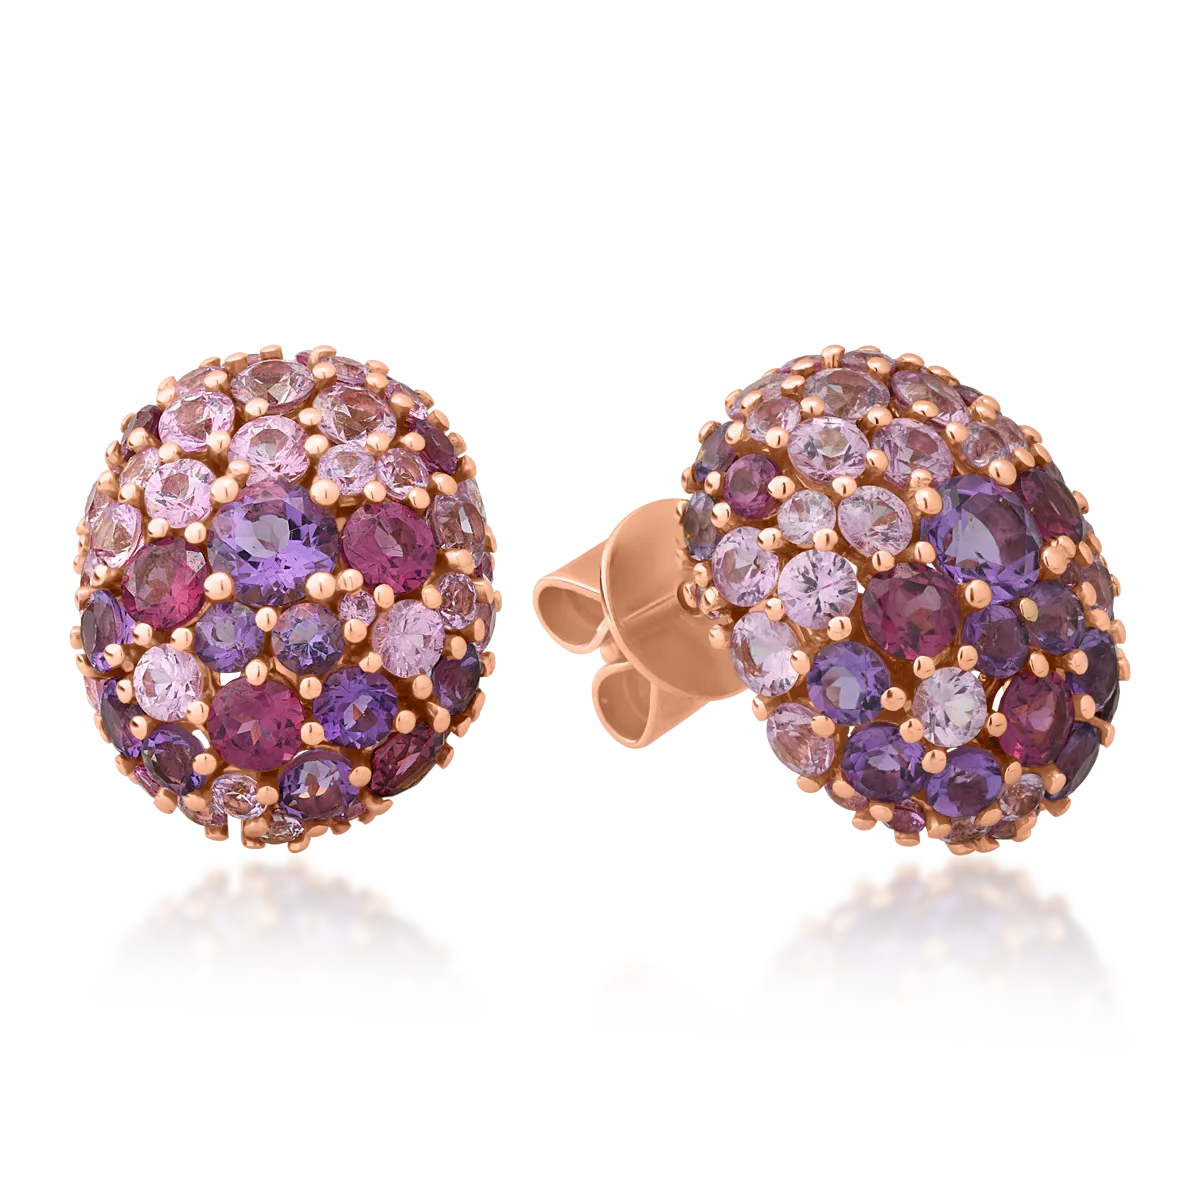 18K rose gold earrings with 1.6ct amethysts and 1.6ct rhodolites